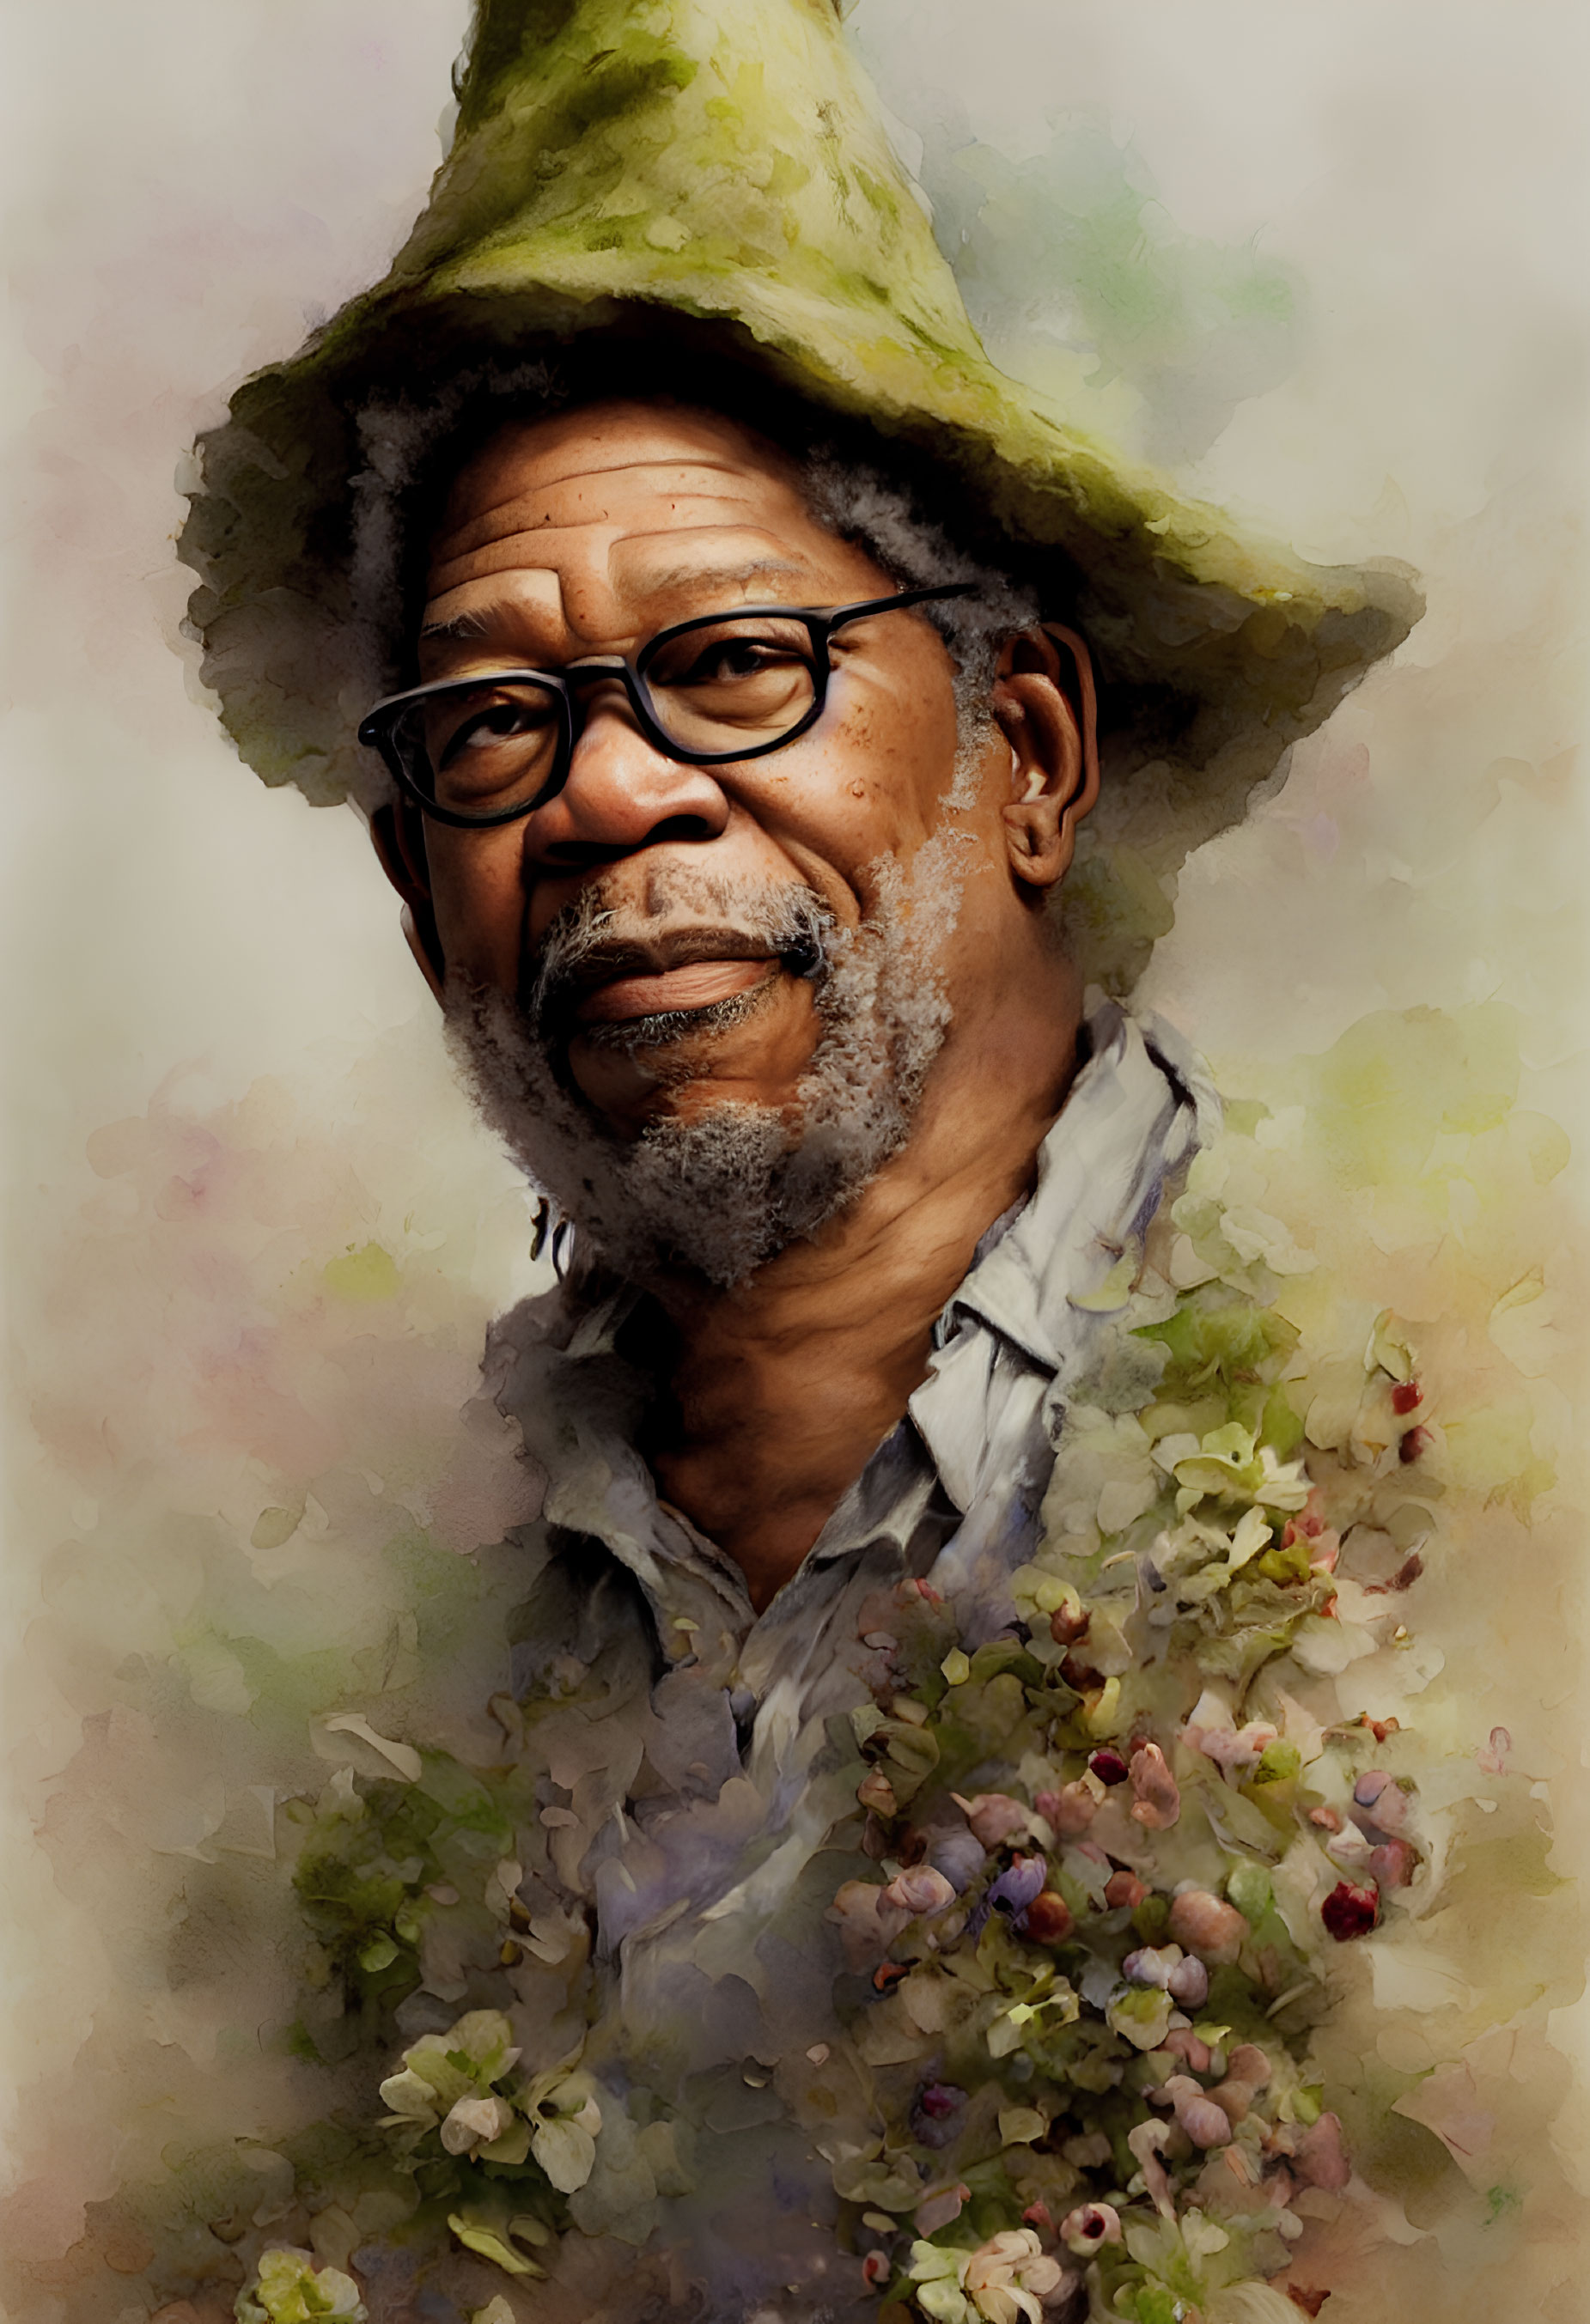 Smiling gentleman with glasses in wide-brimmed hat and floral shirt portrait